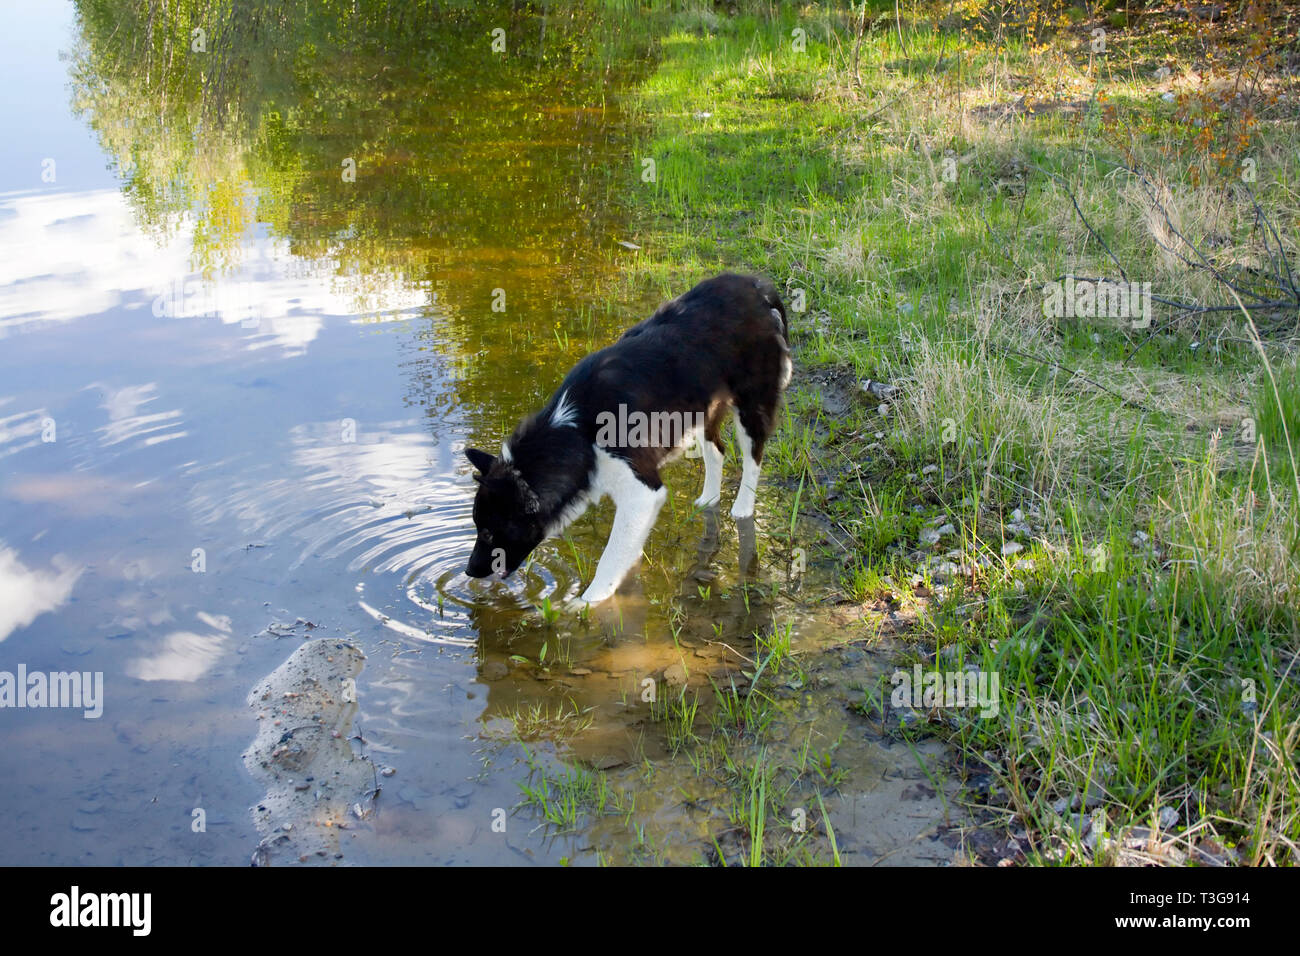 Dog drinking from lake in wild forest Stock Photo